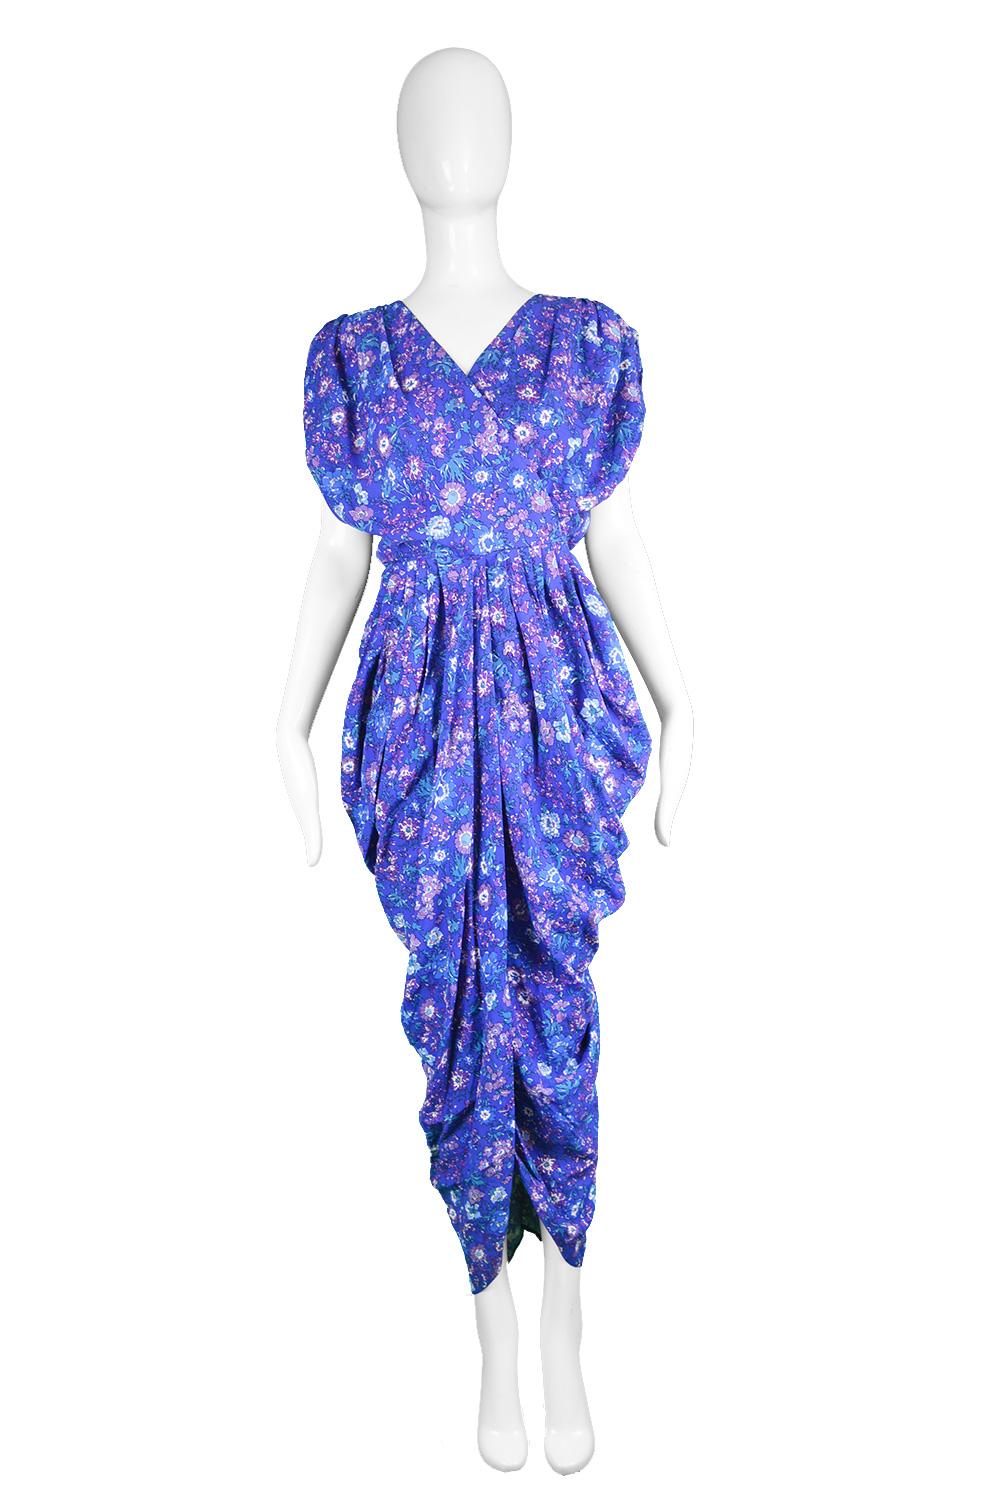 This is a fabulous vintage maxi length dress from the 80s by Droopy & Browns, an iconic British fashion label founded by designer Angela Holmes, who was in Robert Palmer's first rock band and named her label as a tongue-in-cheek reference to the